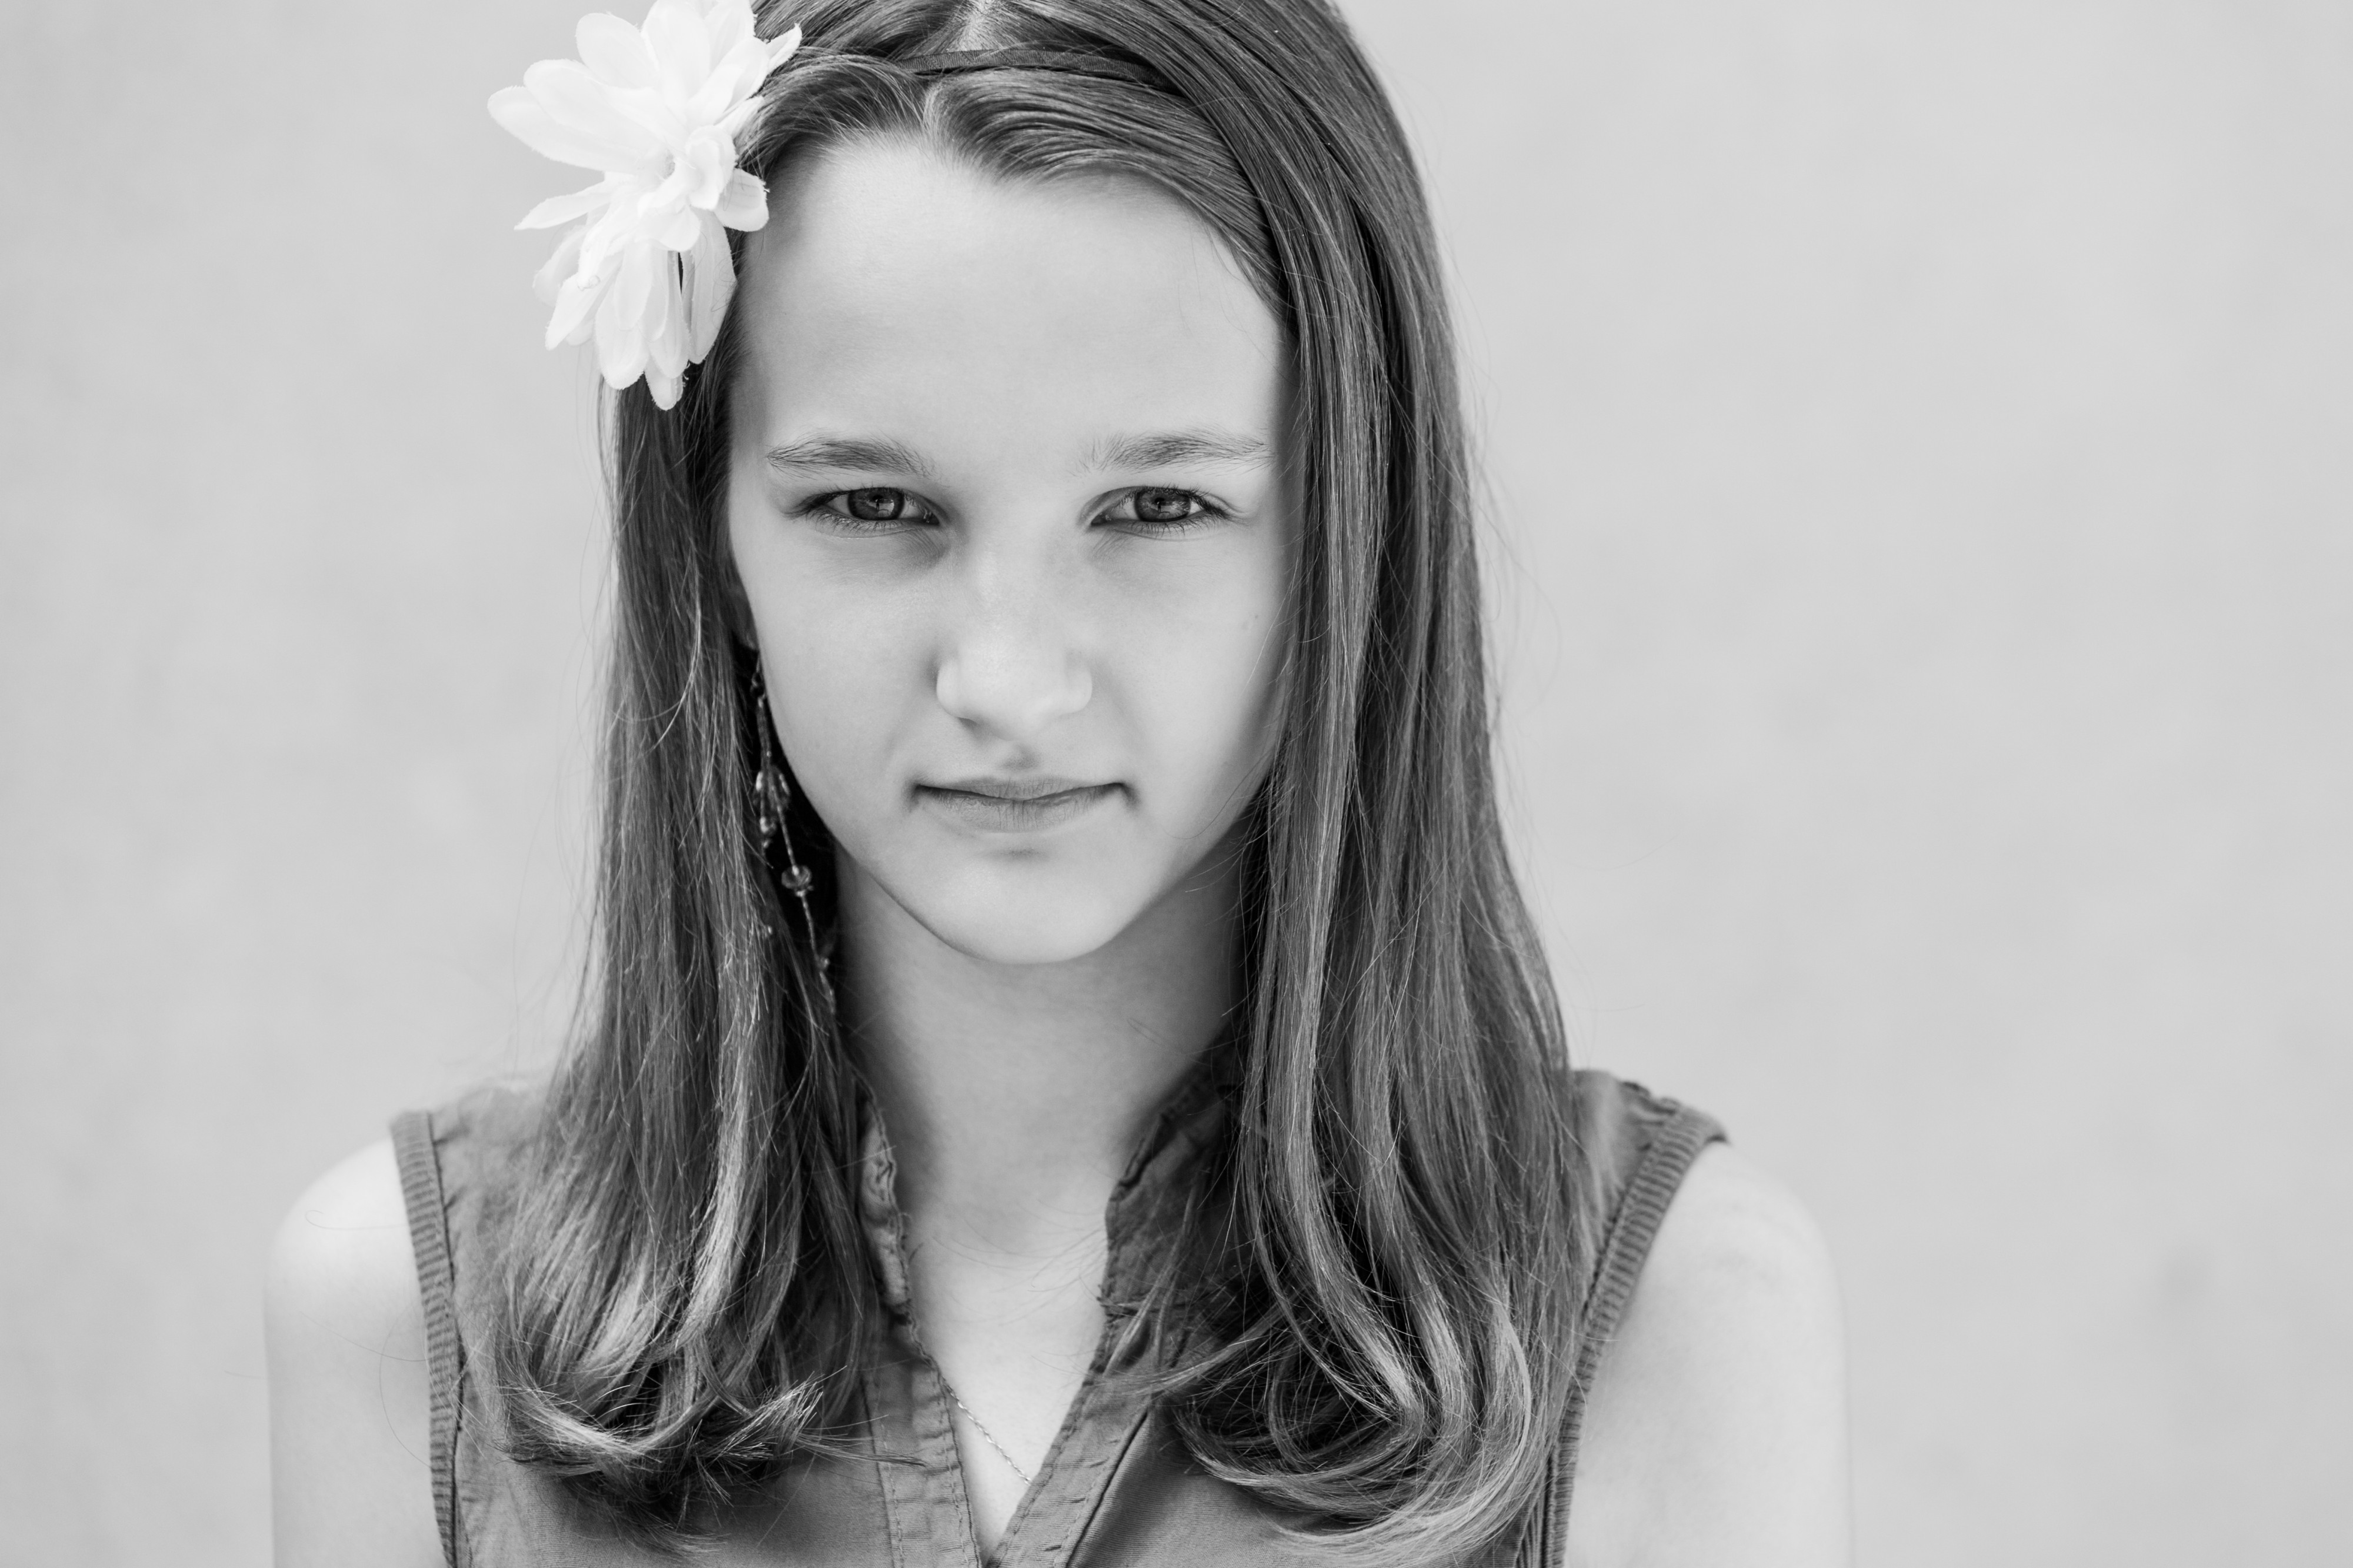 a very photogenic 12-year-old Catholic girl photographed in June 2014, picture 1/4, black and white